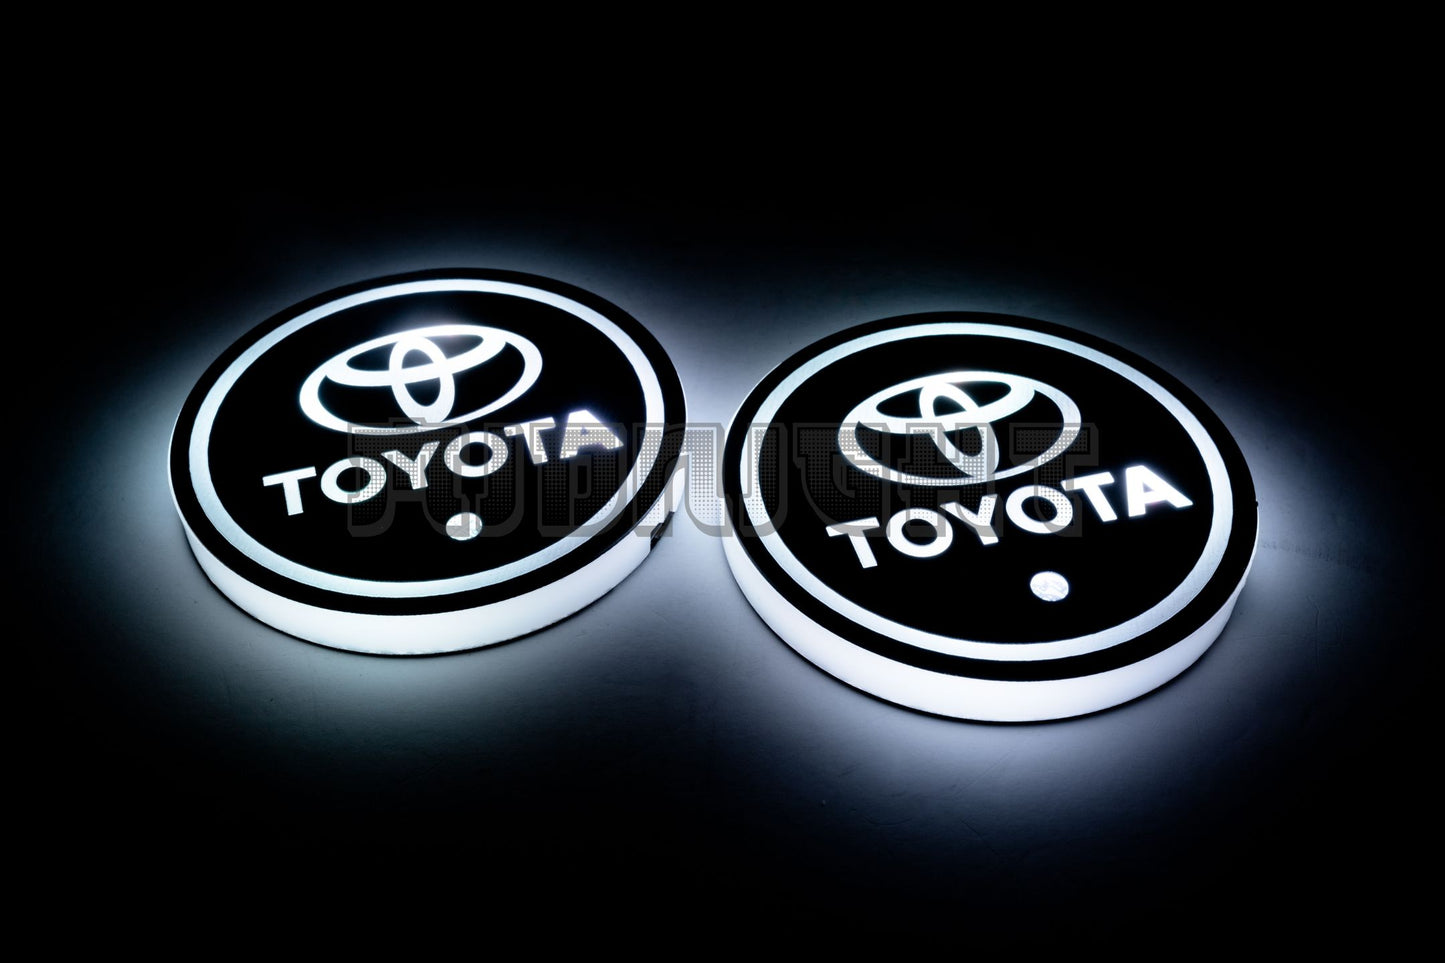 Toyota LED Cup Holder Coaster